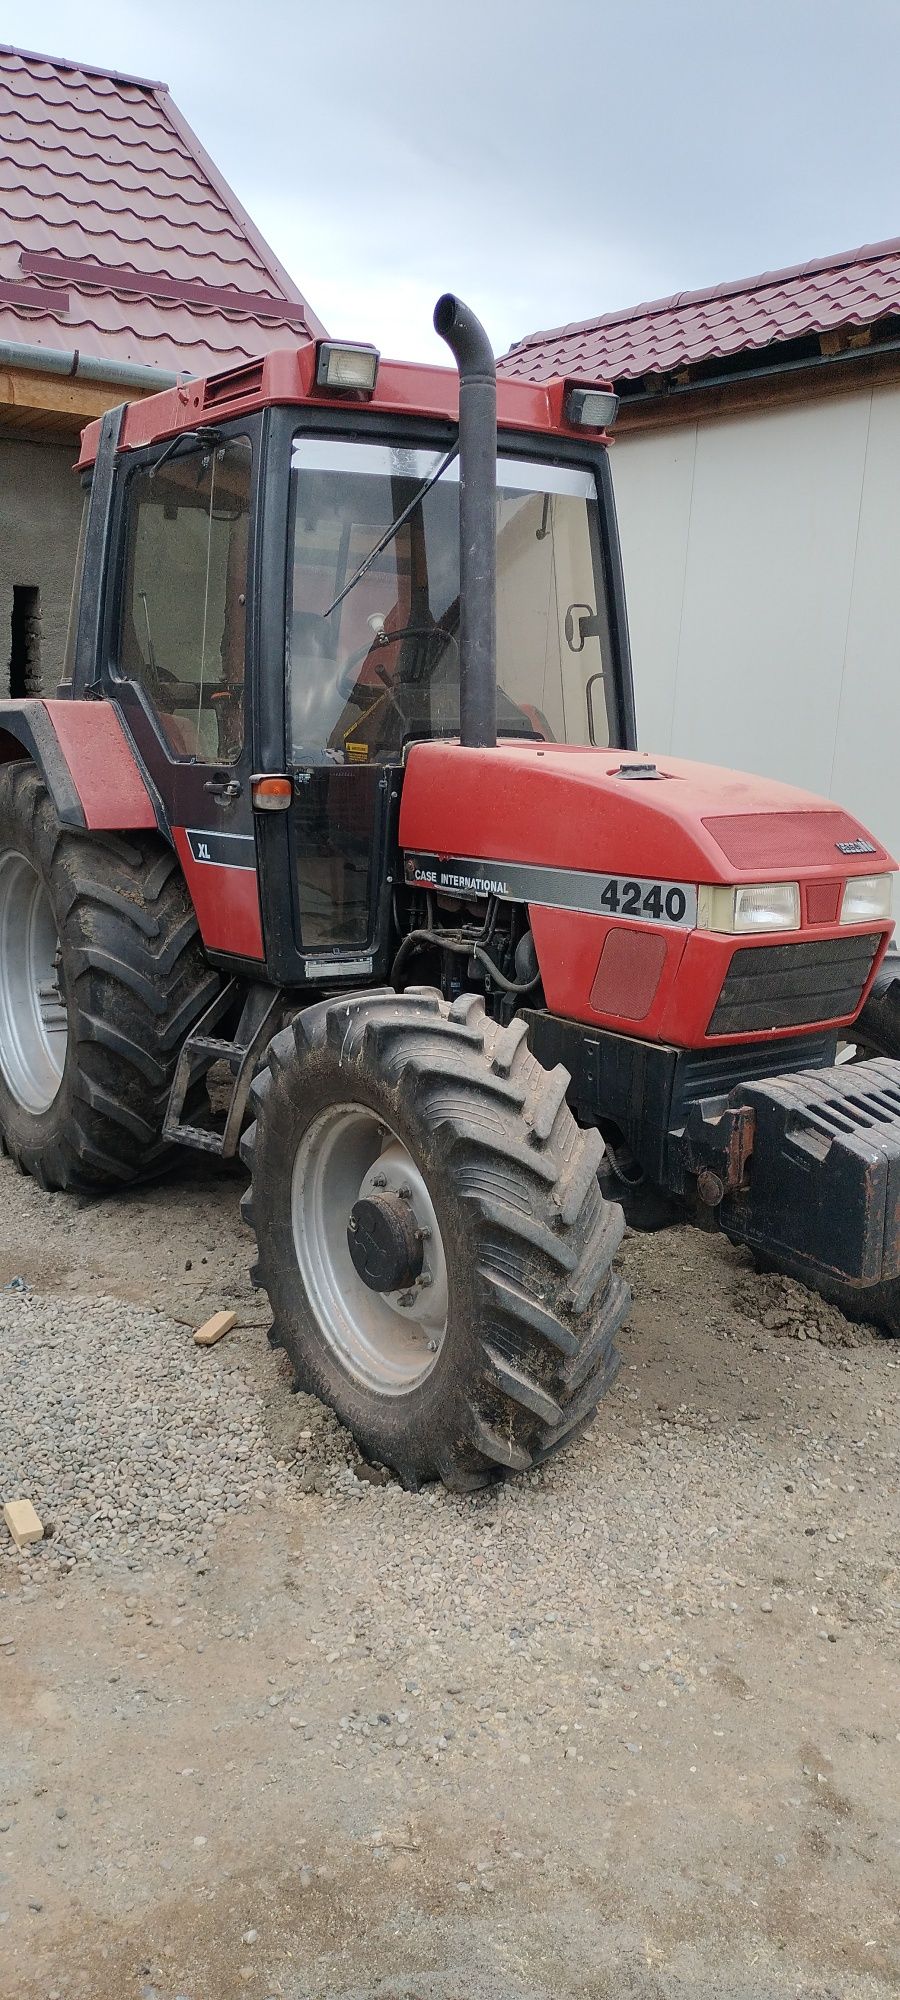 Tractor case 4240